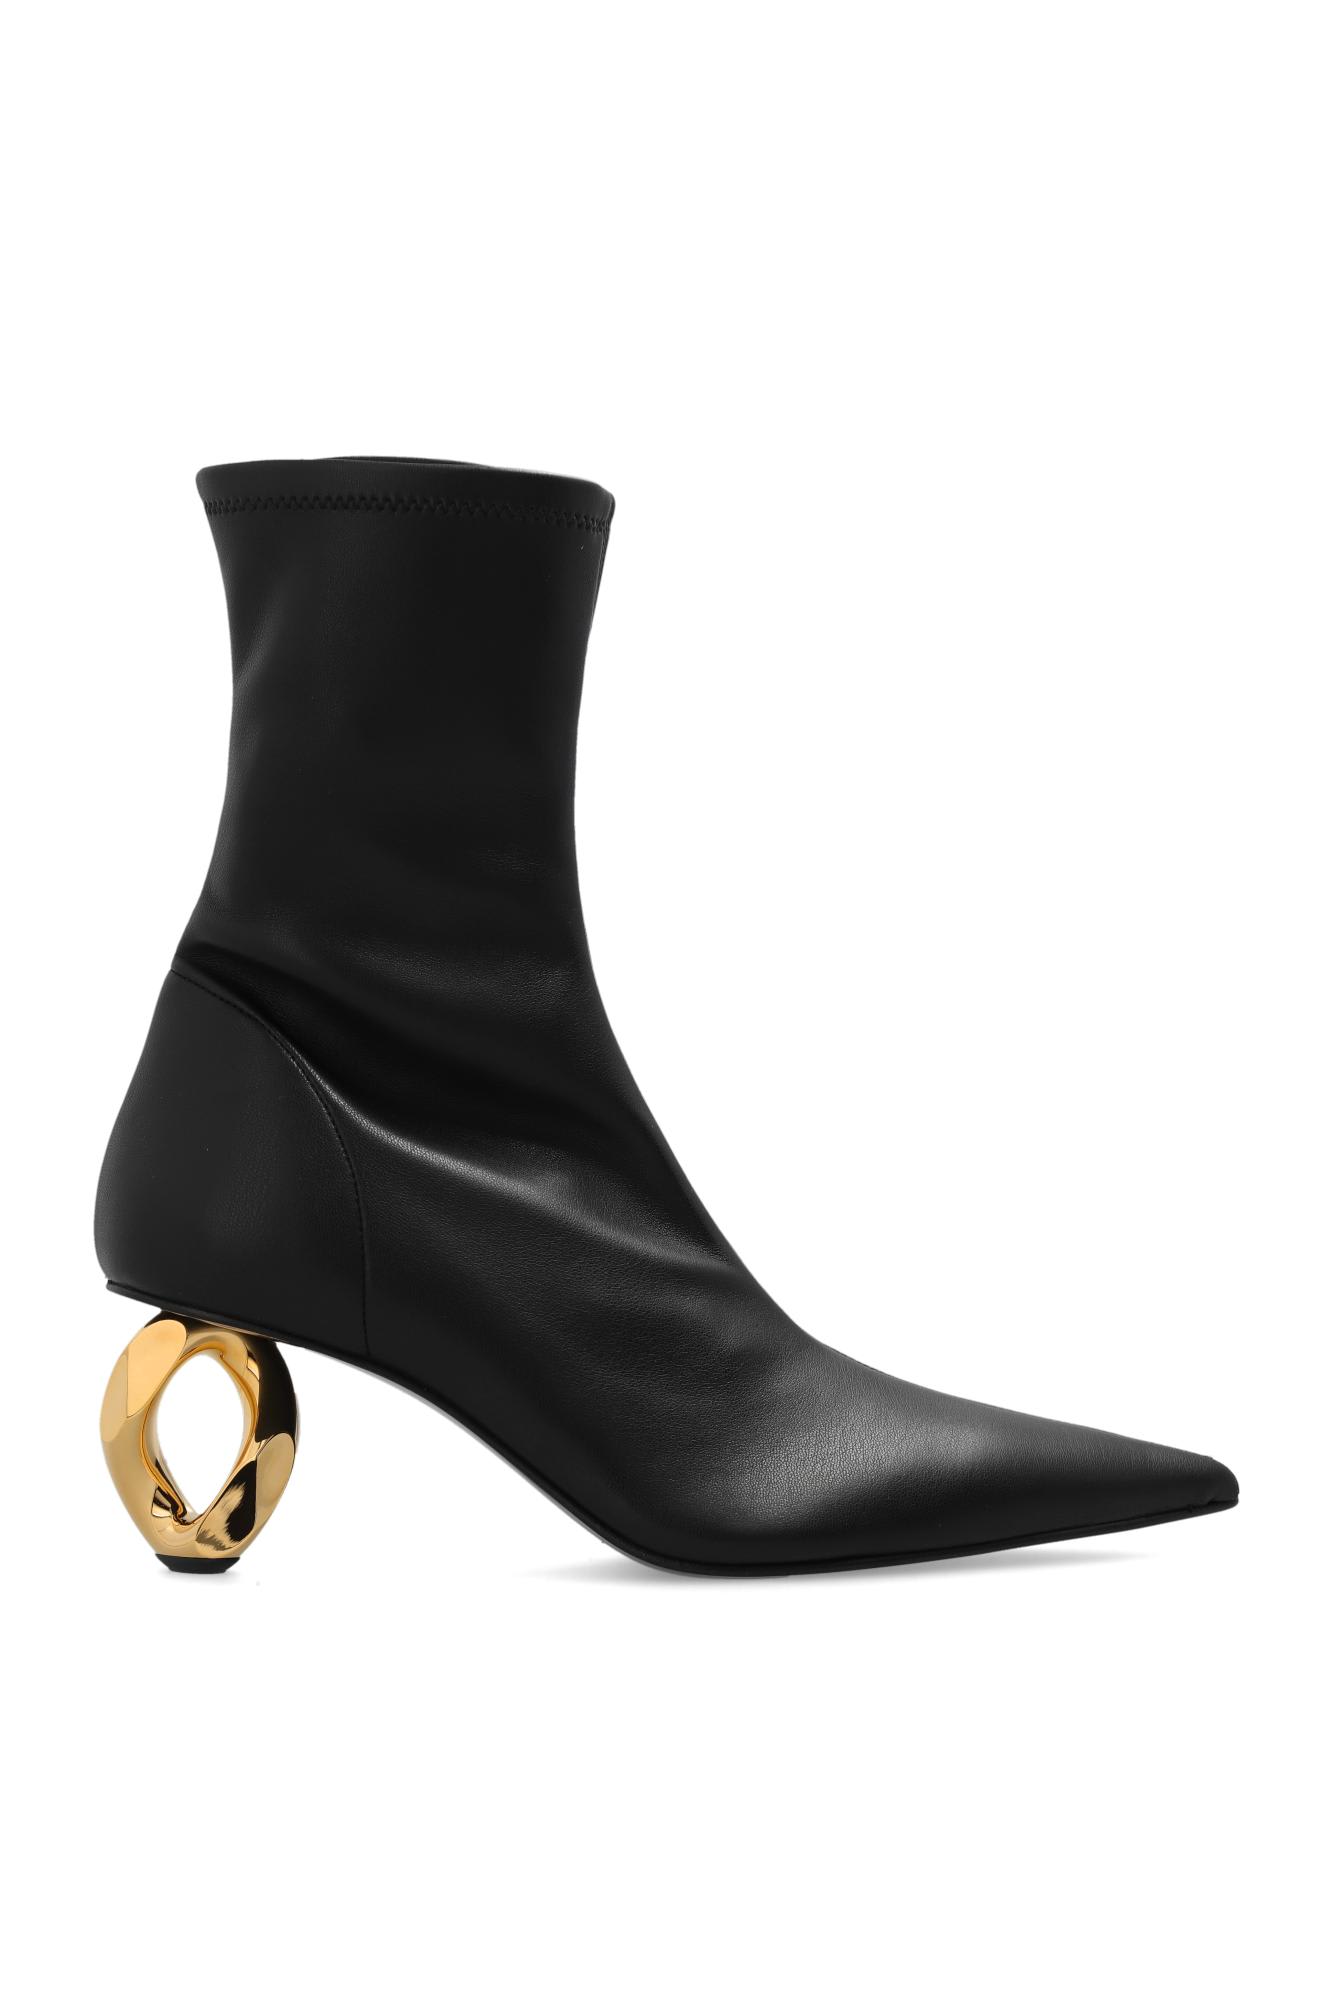 J.W. Anderson Heeled Ankle Boots